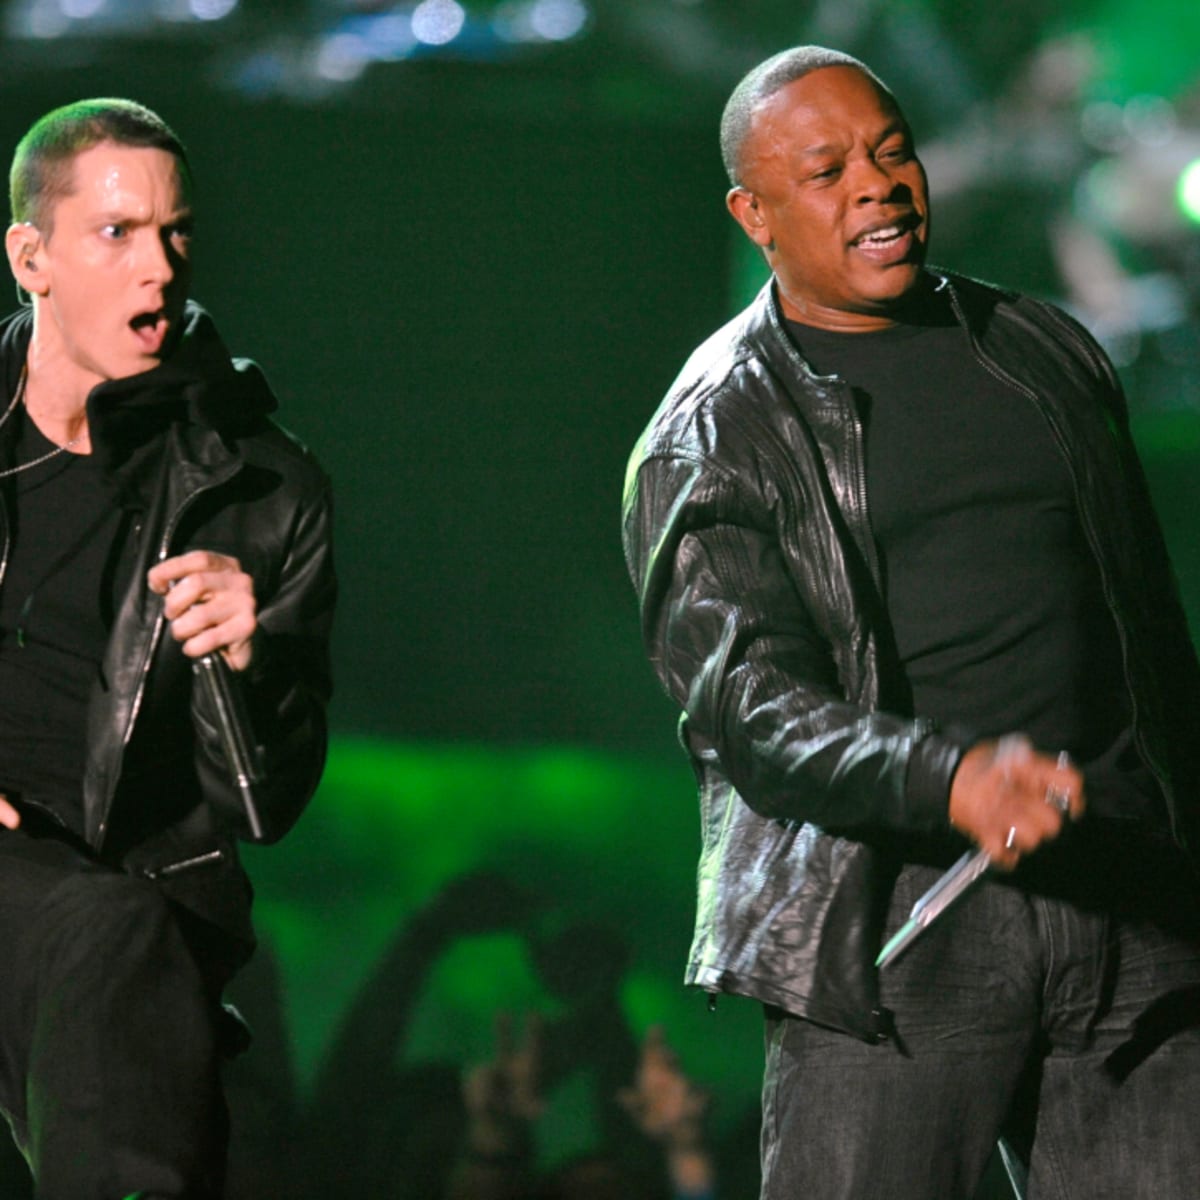 Super Bowl: Dr Dre and Eminem pack in the hits at half-time show - BBC News